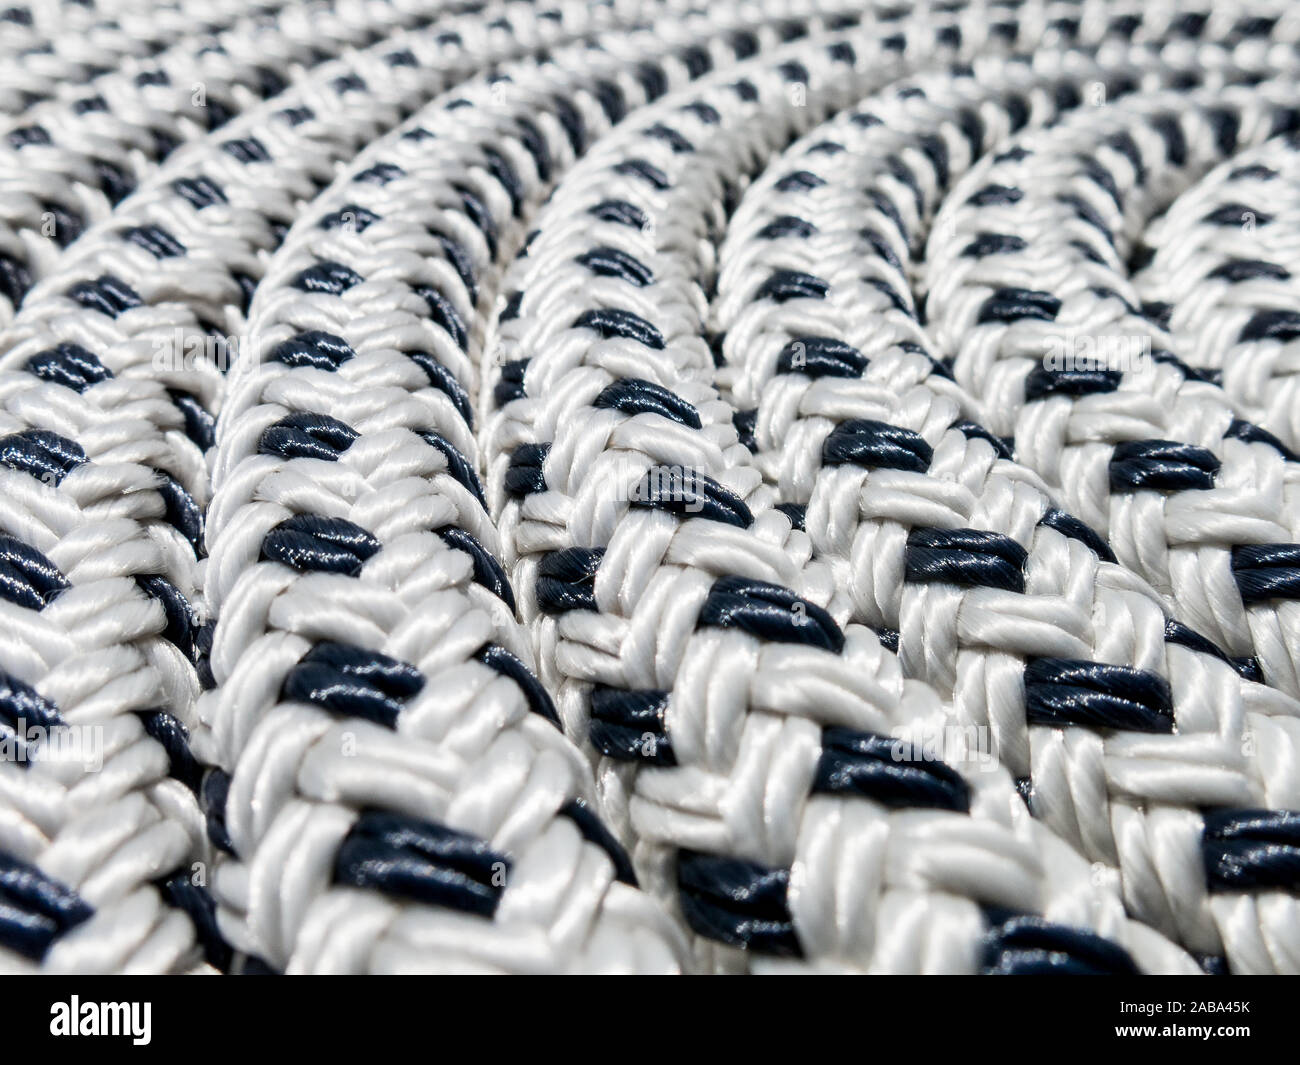 Close-up of braided polyester black and white marine rope coiled in a circle Stock Photo